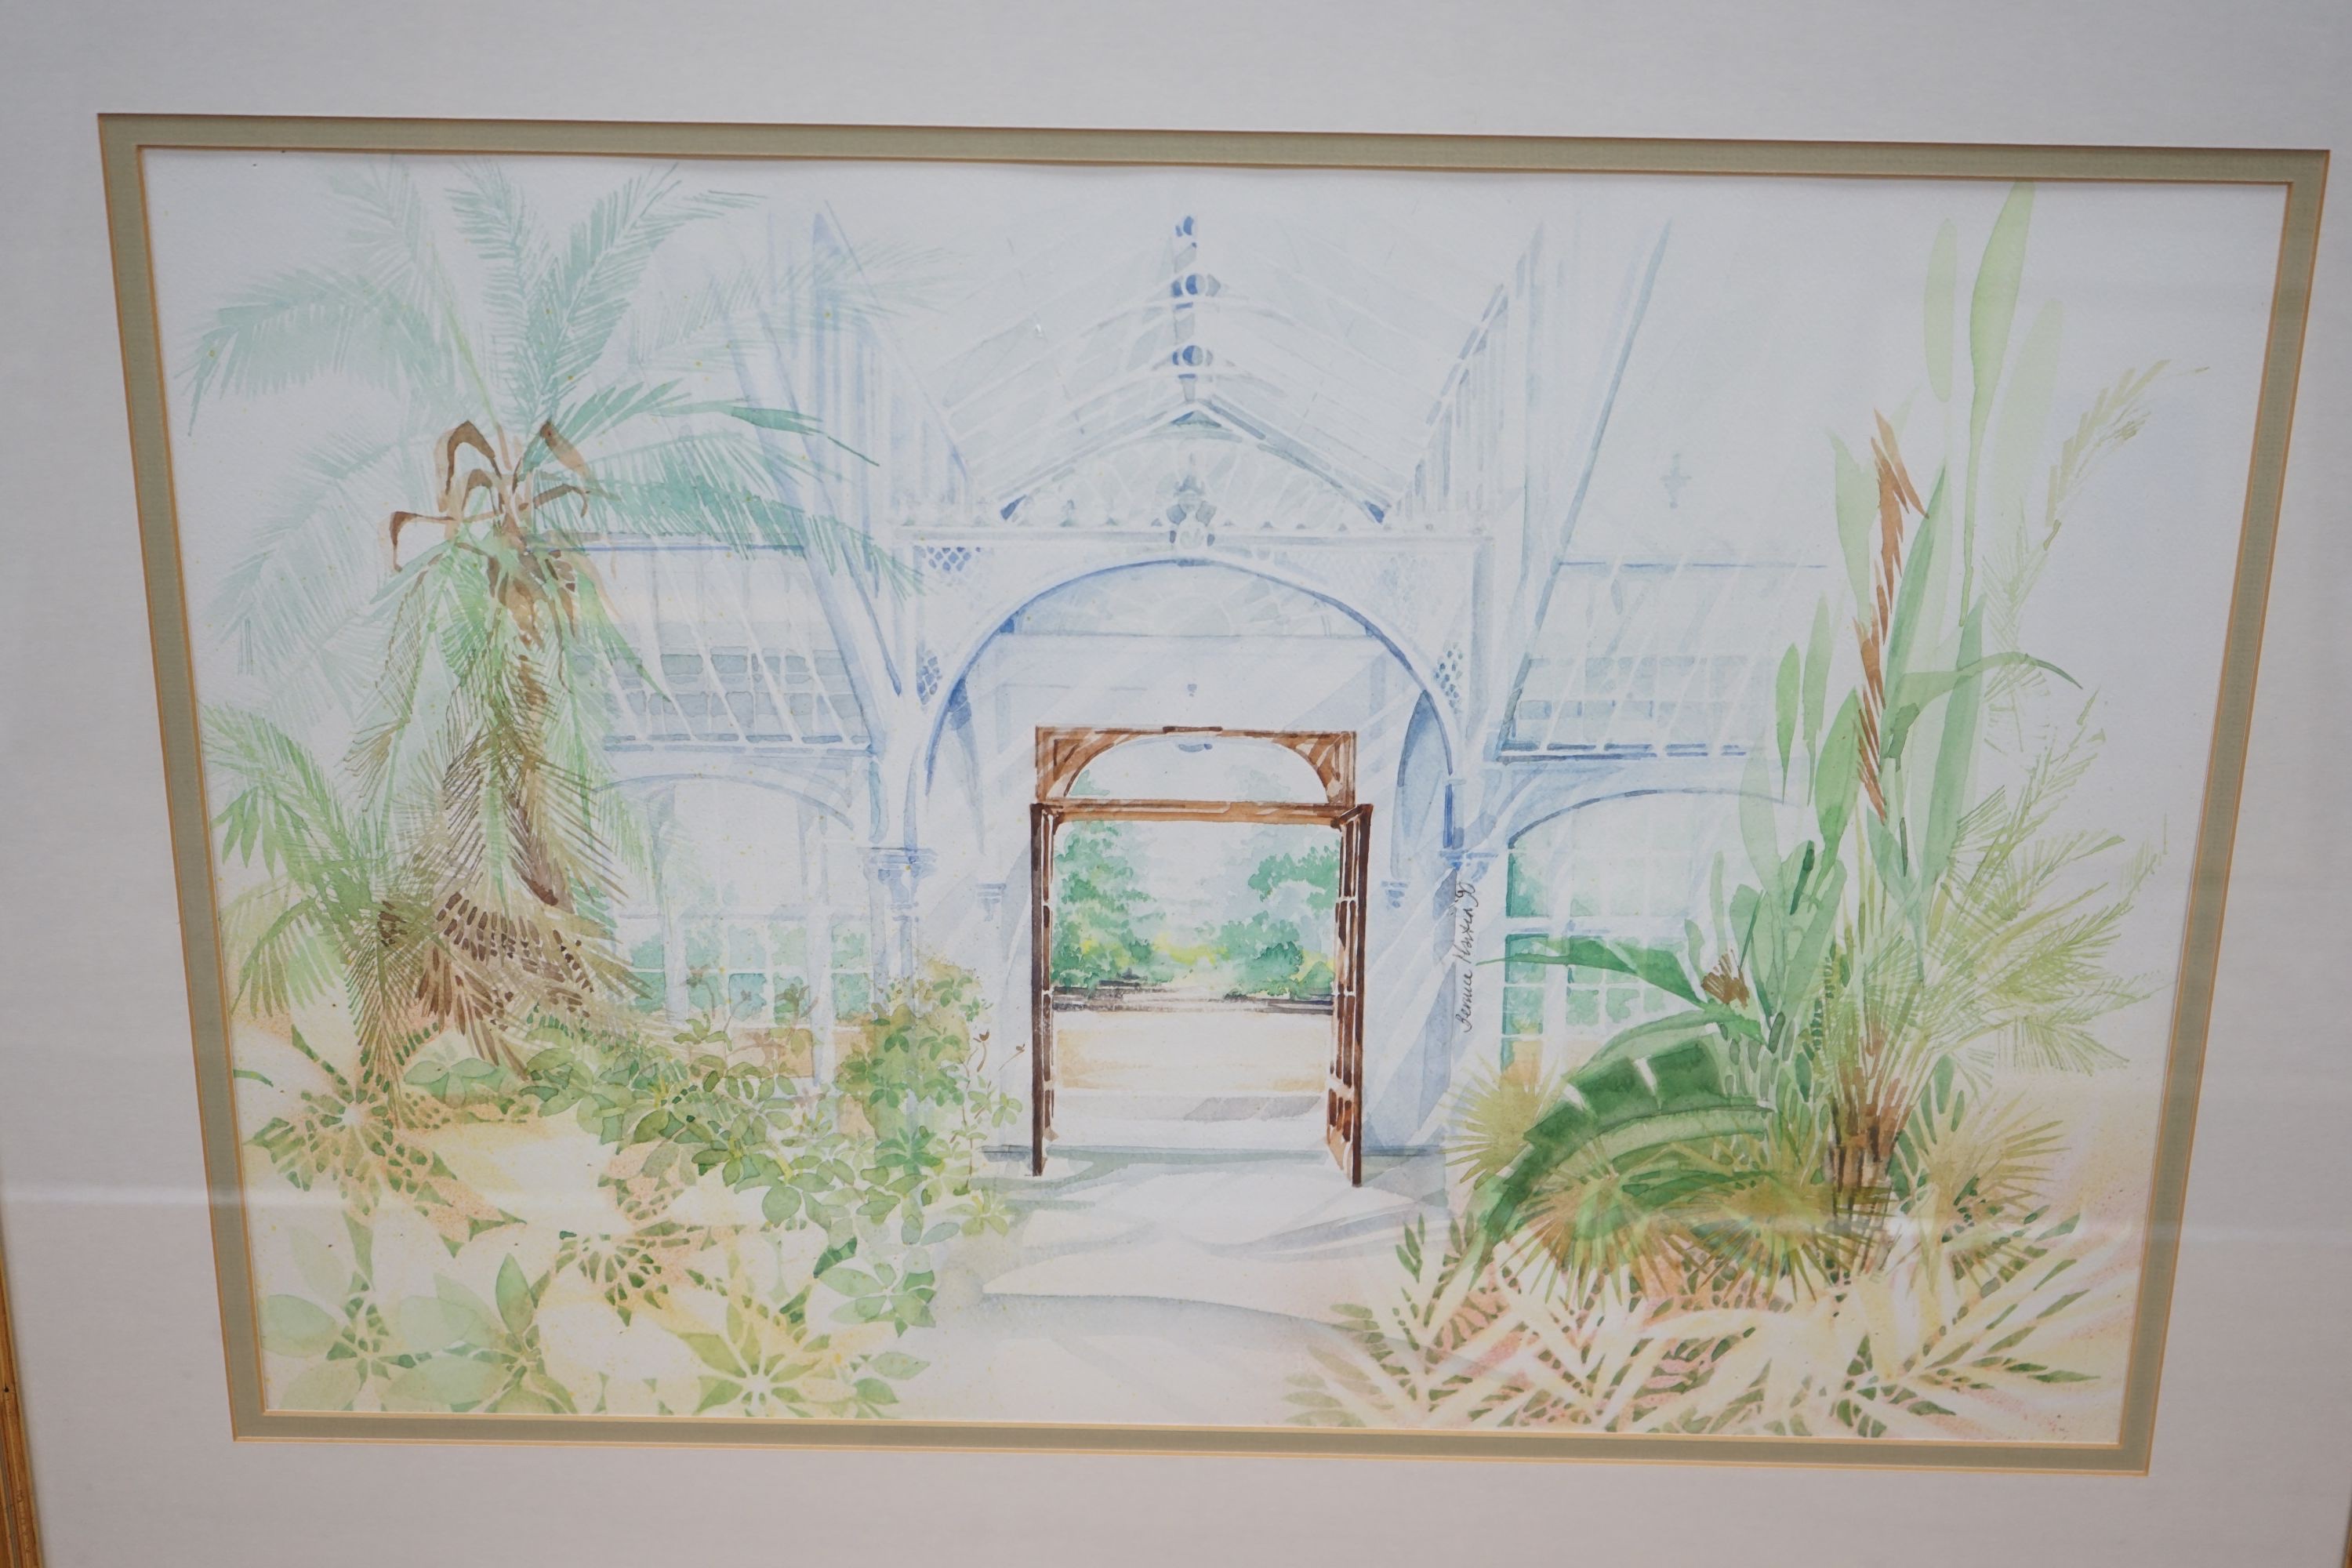 Bernice Martin, pair of watercolours, Kew Series I and 2, signed and dated '90, 44 x 65cm